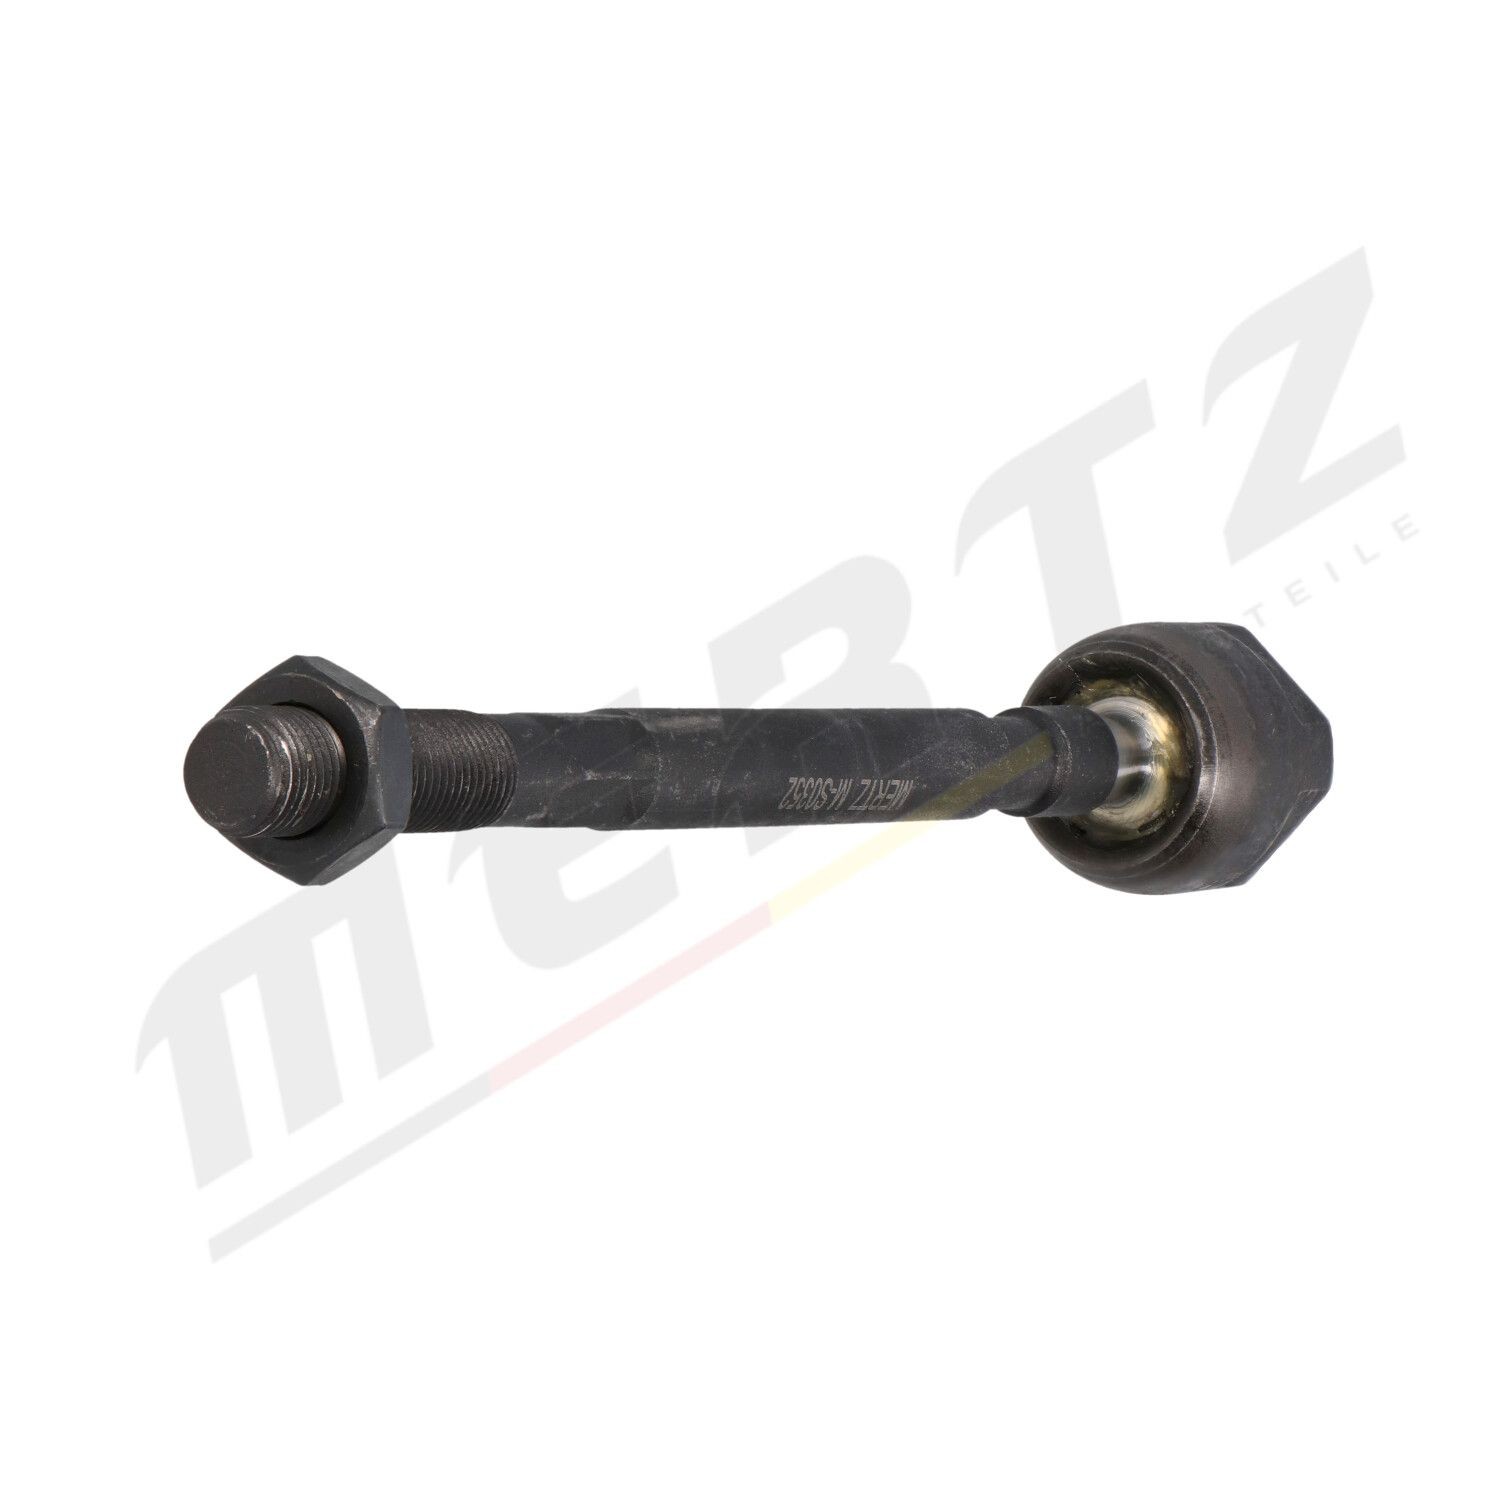 M-S0352 Steering rack end M-S0352 MERTZ Front Axle Left, Front Axle Right, 240 mm